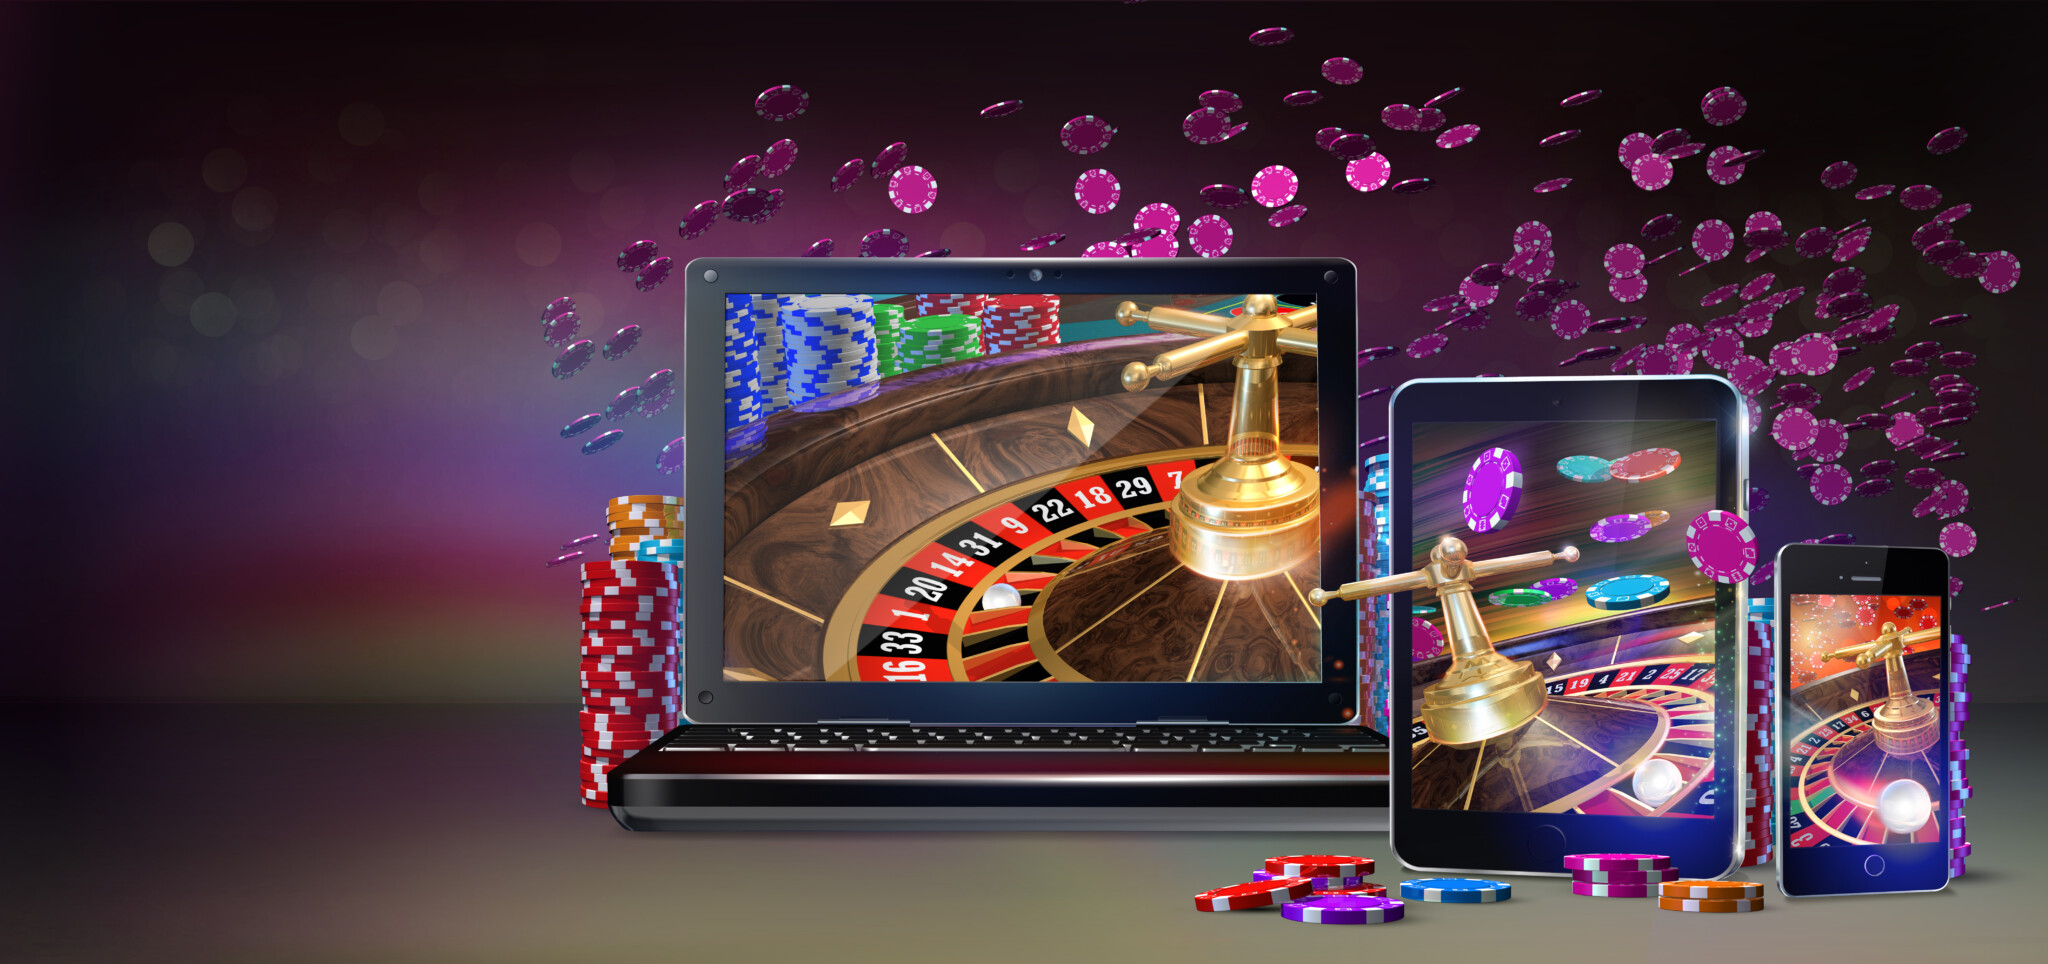 Want to play at the online casino? Beware of these 8 risks